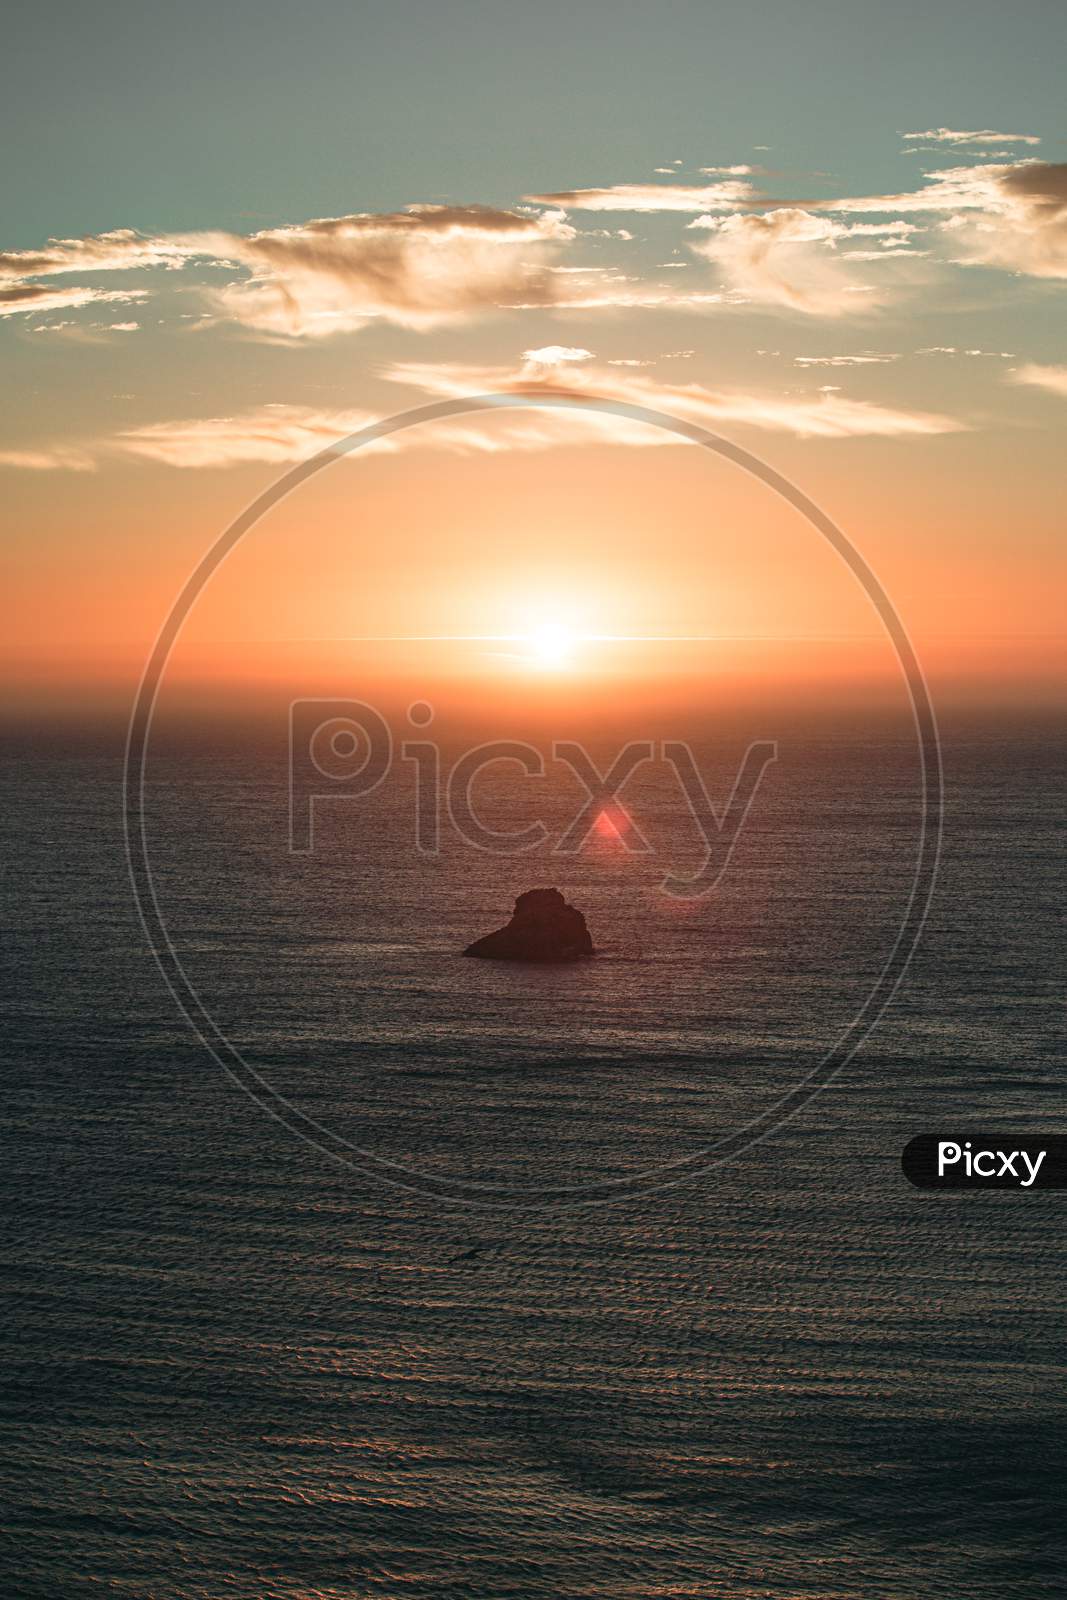 A Massive Sunset With Sun Flares Over The Ocean With A Rock In The Middle Of The Sea